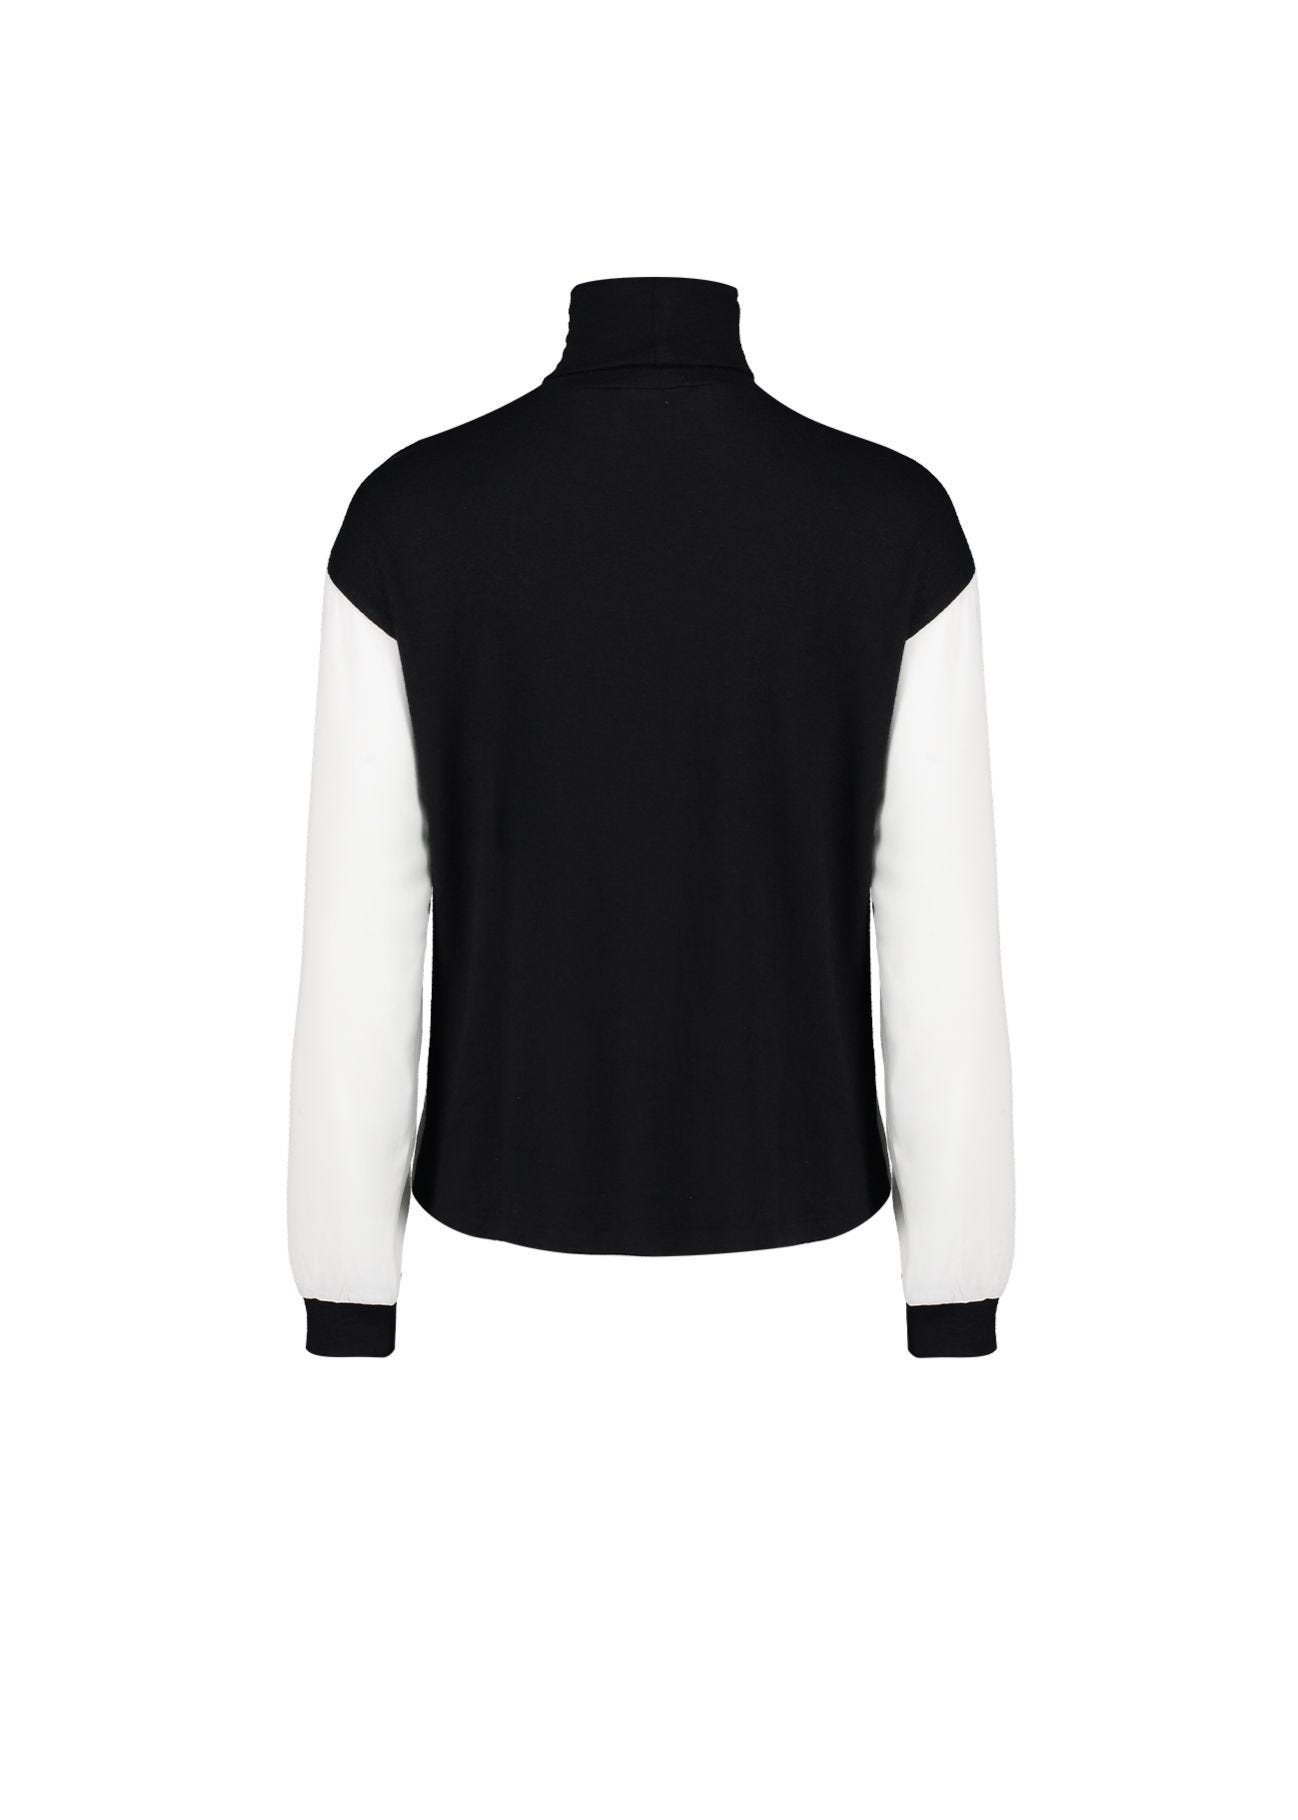 T-shirt with polo neck collar